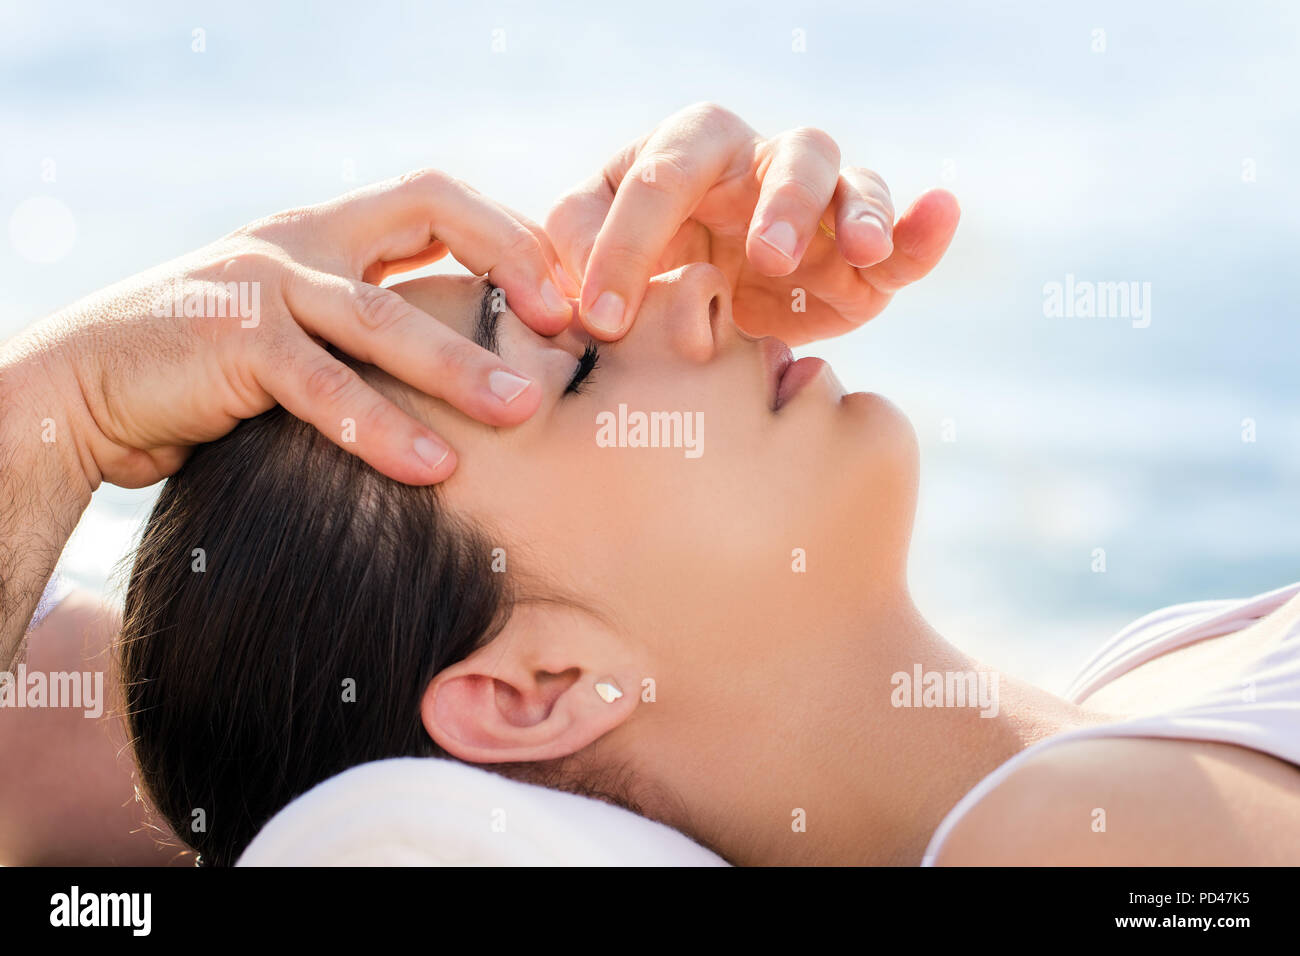 Close up of osteopath doing facial therapy on woman outdoors.Therapist applying pressure with fingers between eyes. Stock Photo